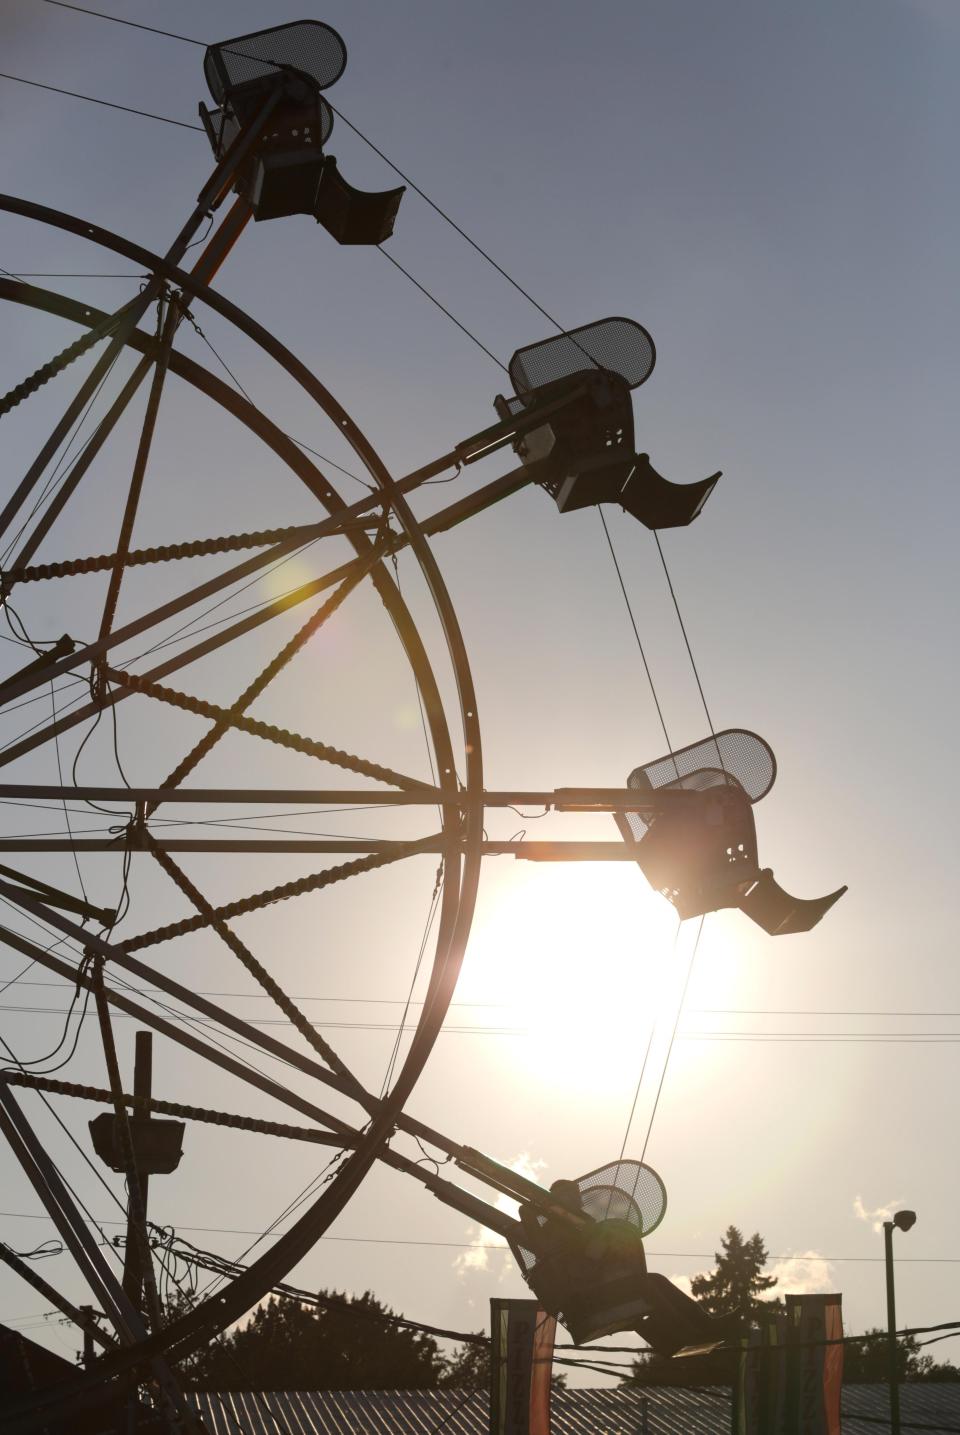 Amusement park rides will be among the many attractions at this summer's Stark County Fair.